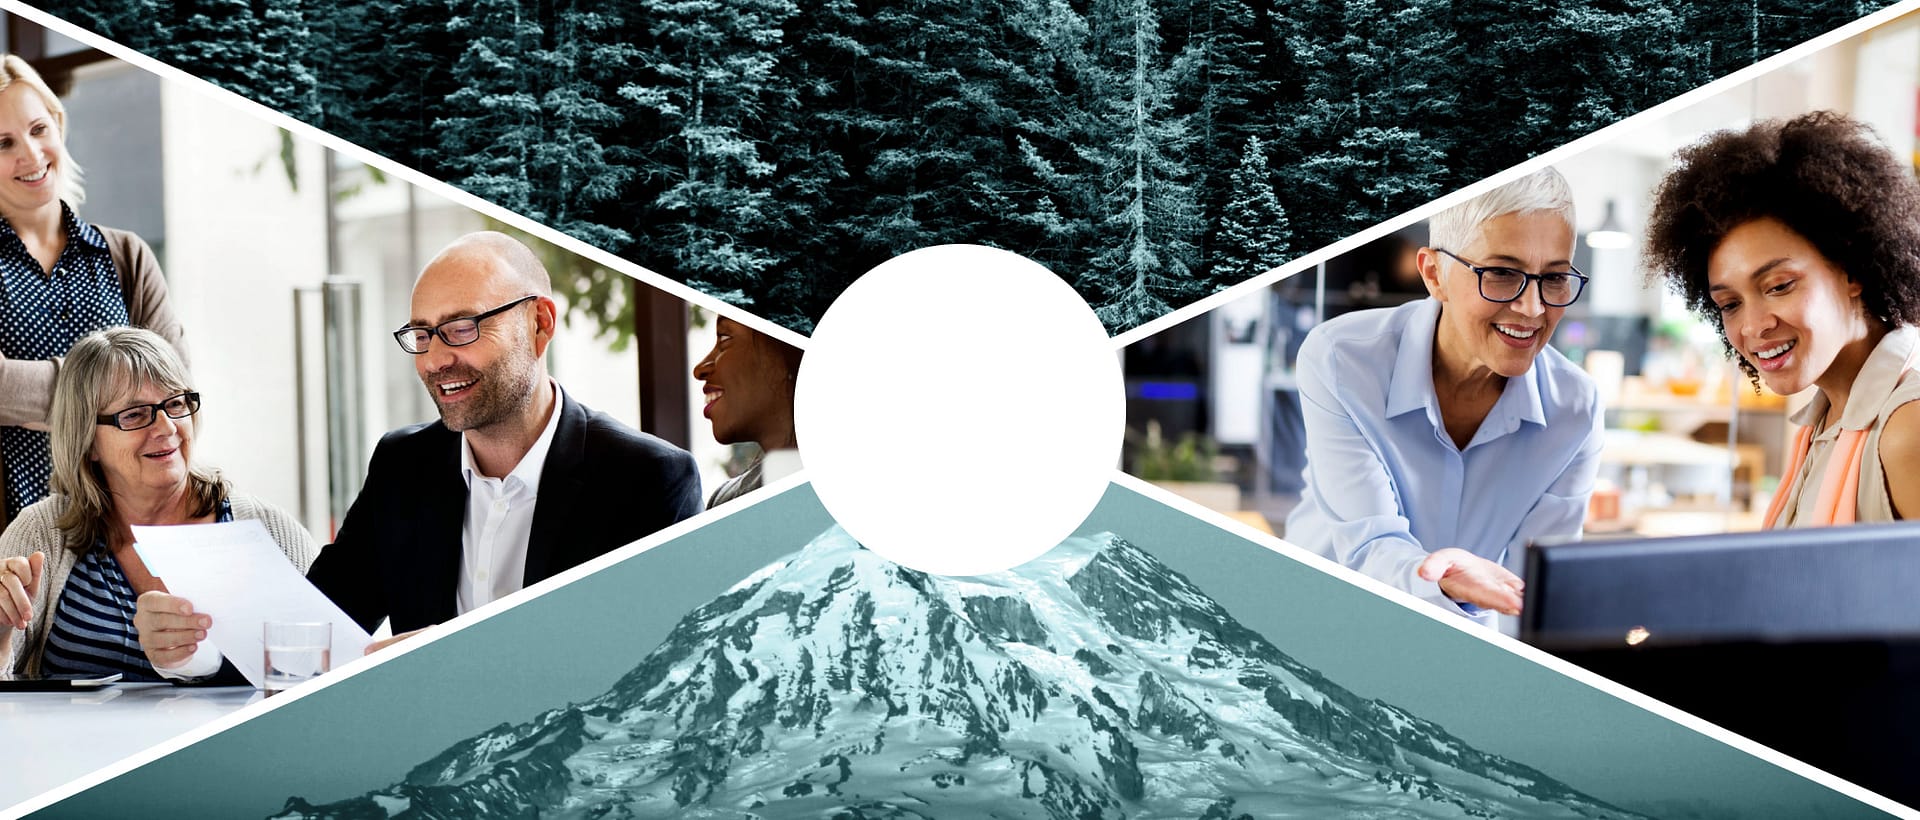 Collage featuring human resources professionals interspersed with Puget Sound nature scenes